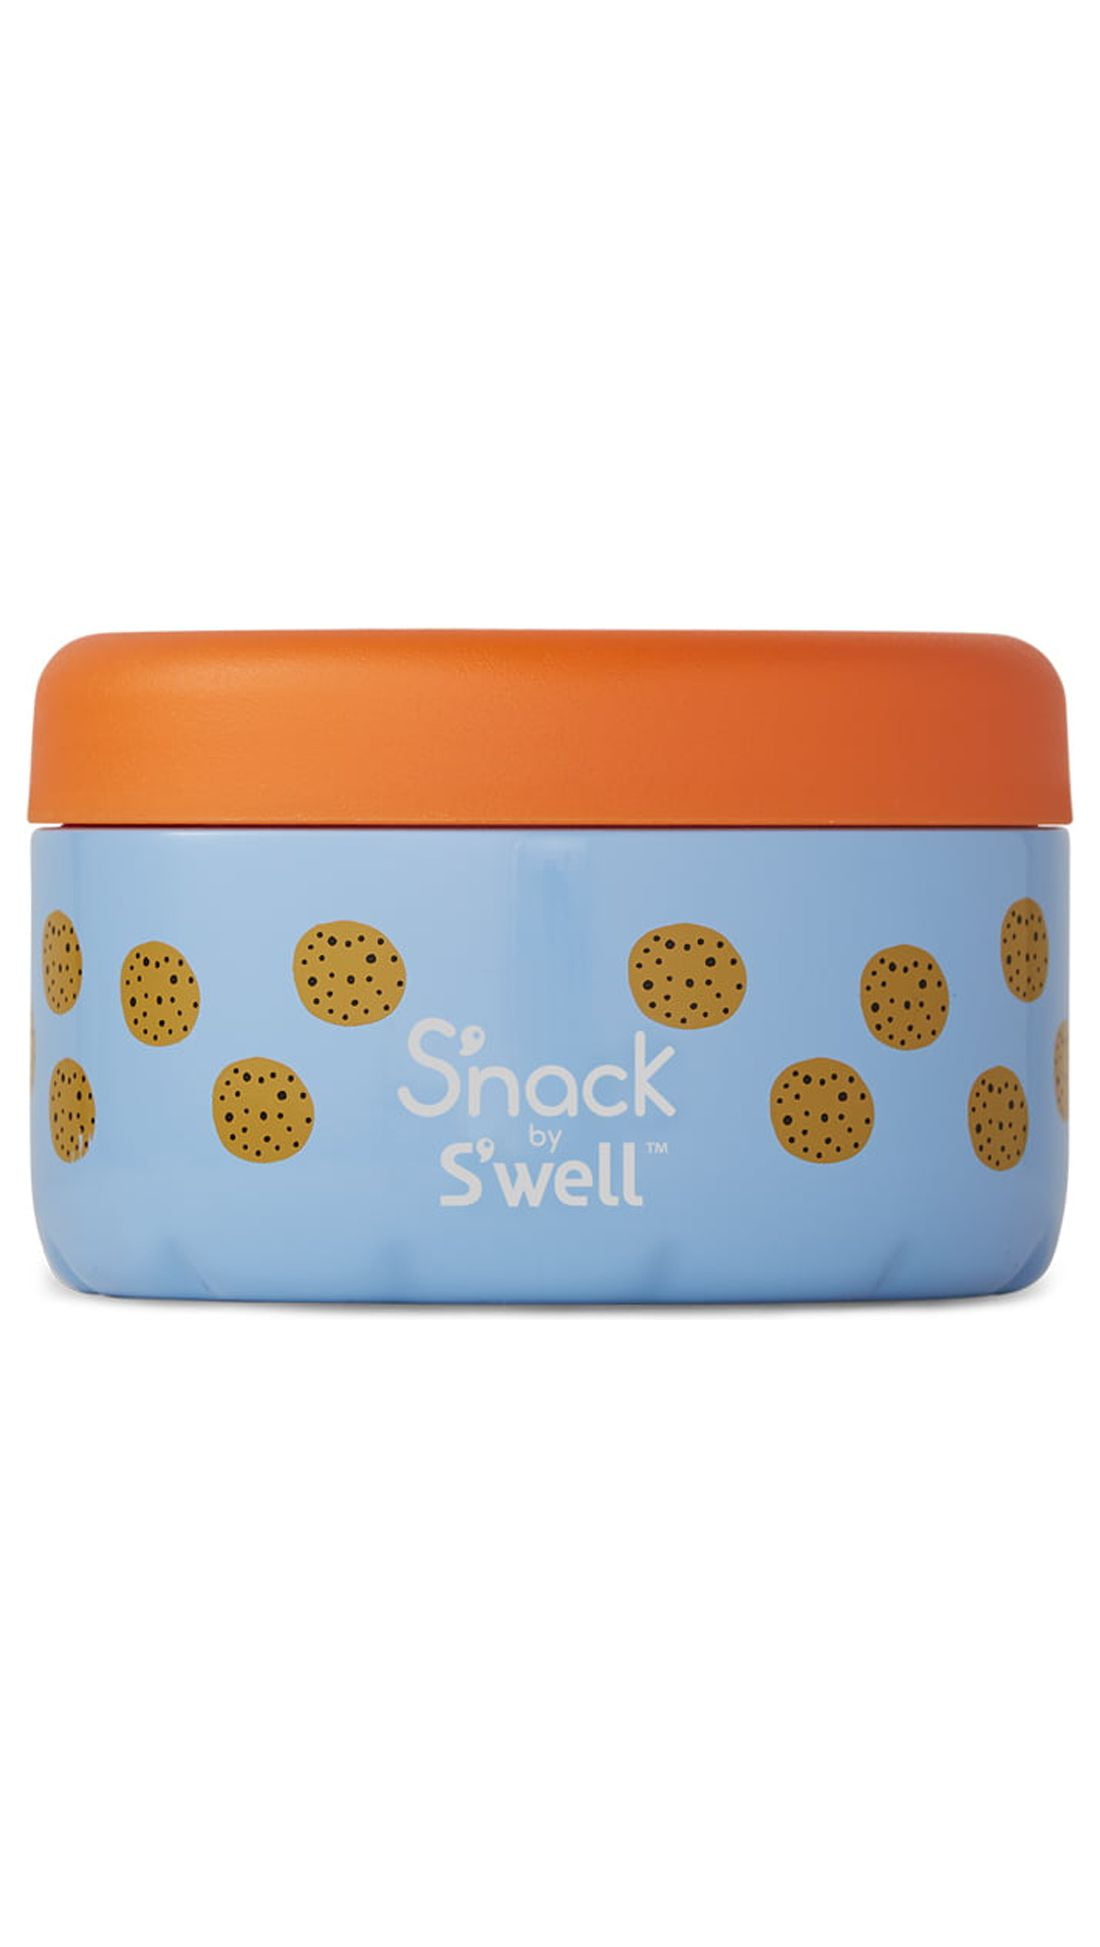 S'nack by S'well Jelly Bean Vacuum-Insulated Stainless Steel Food